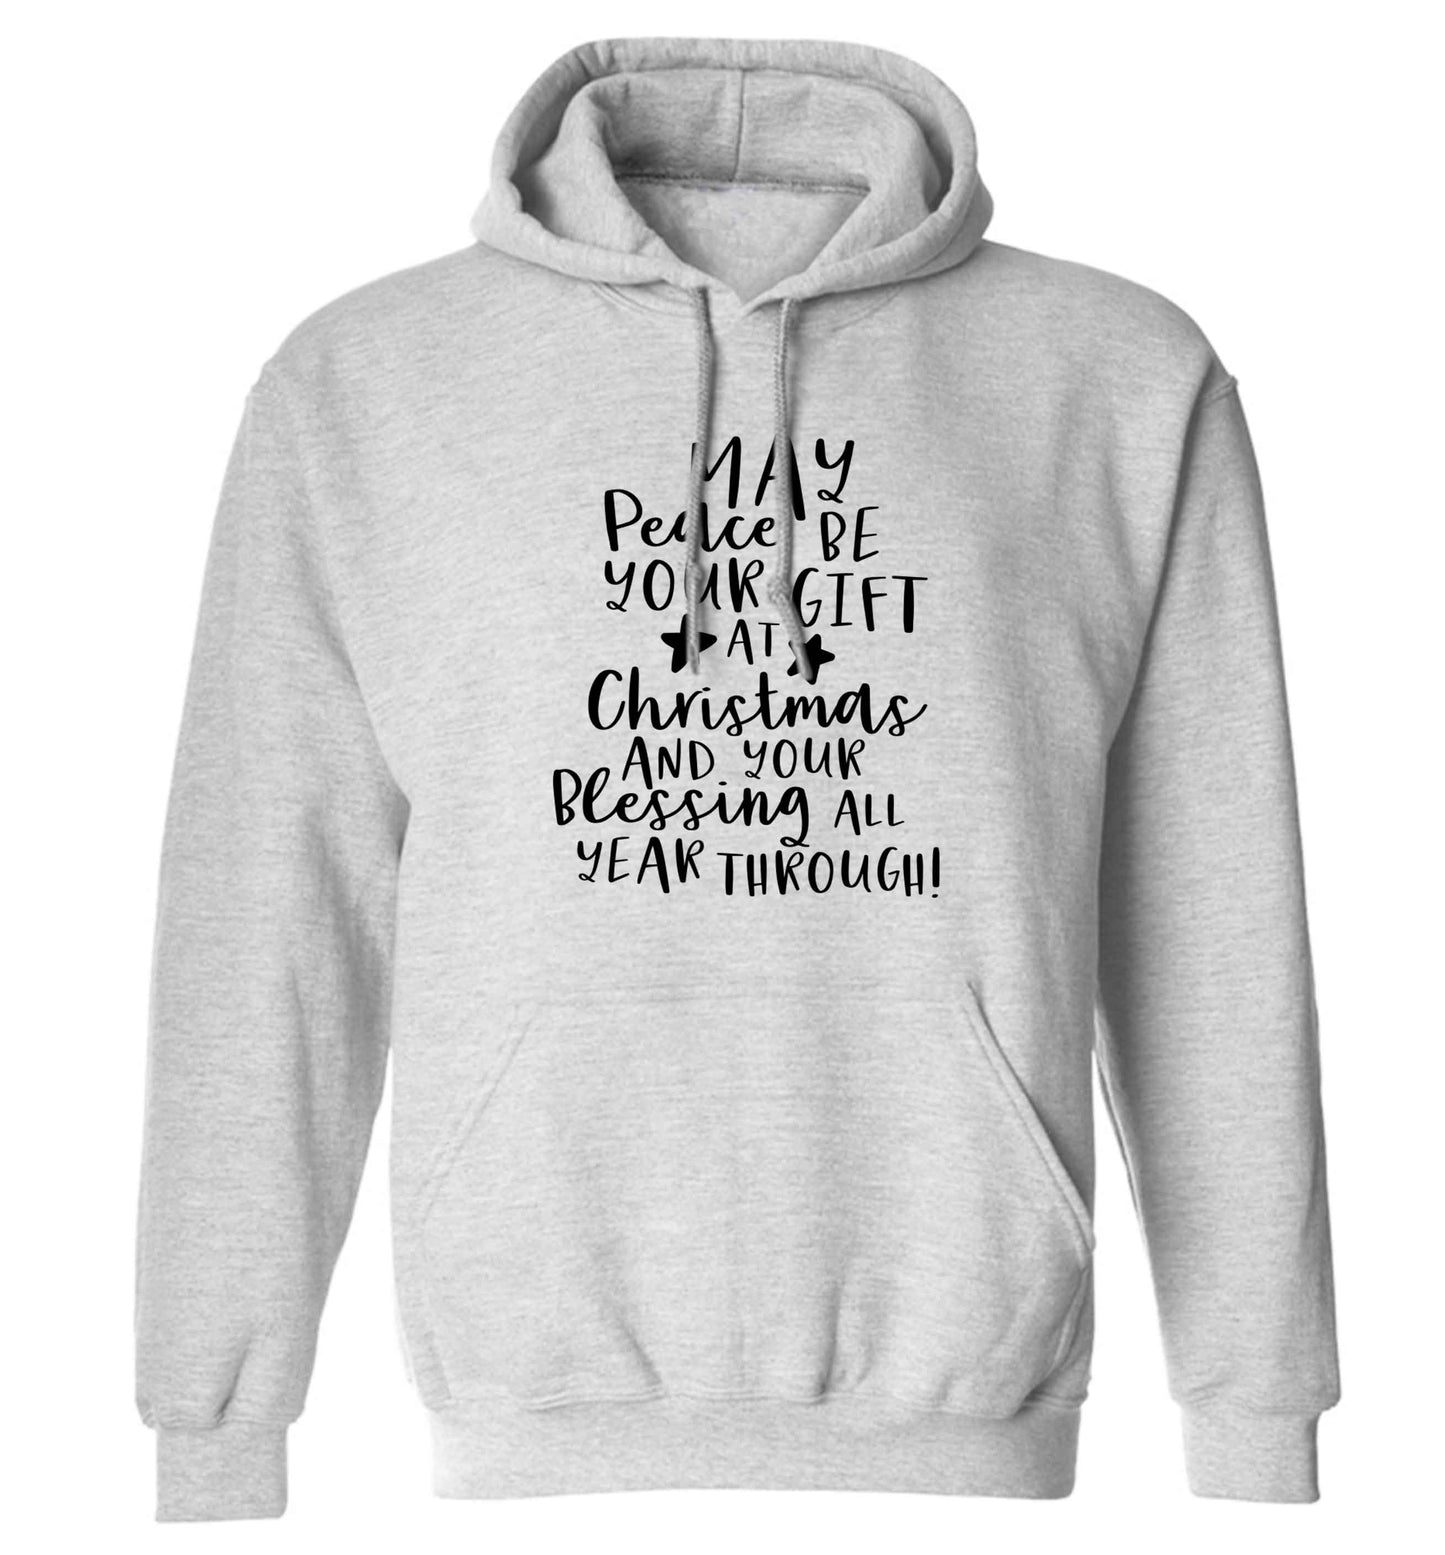 Peace be your Gift at Christmas Gift adults unisex grey hoodie 2XL